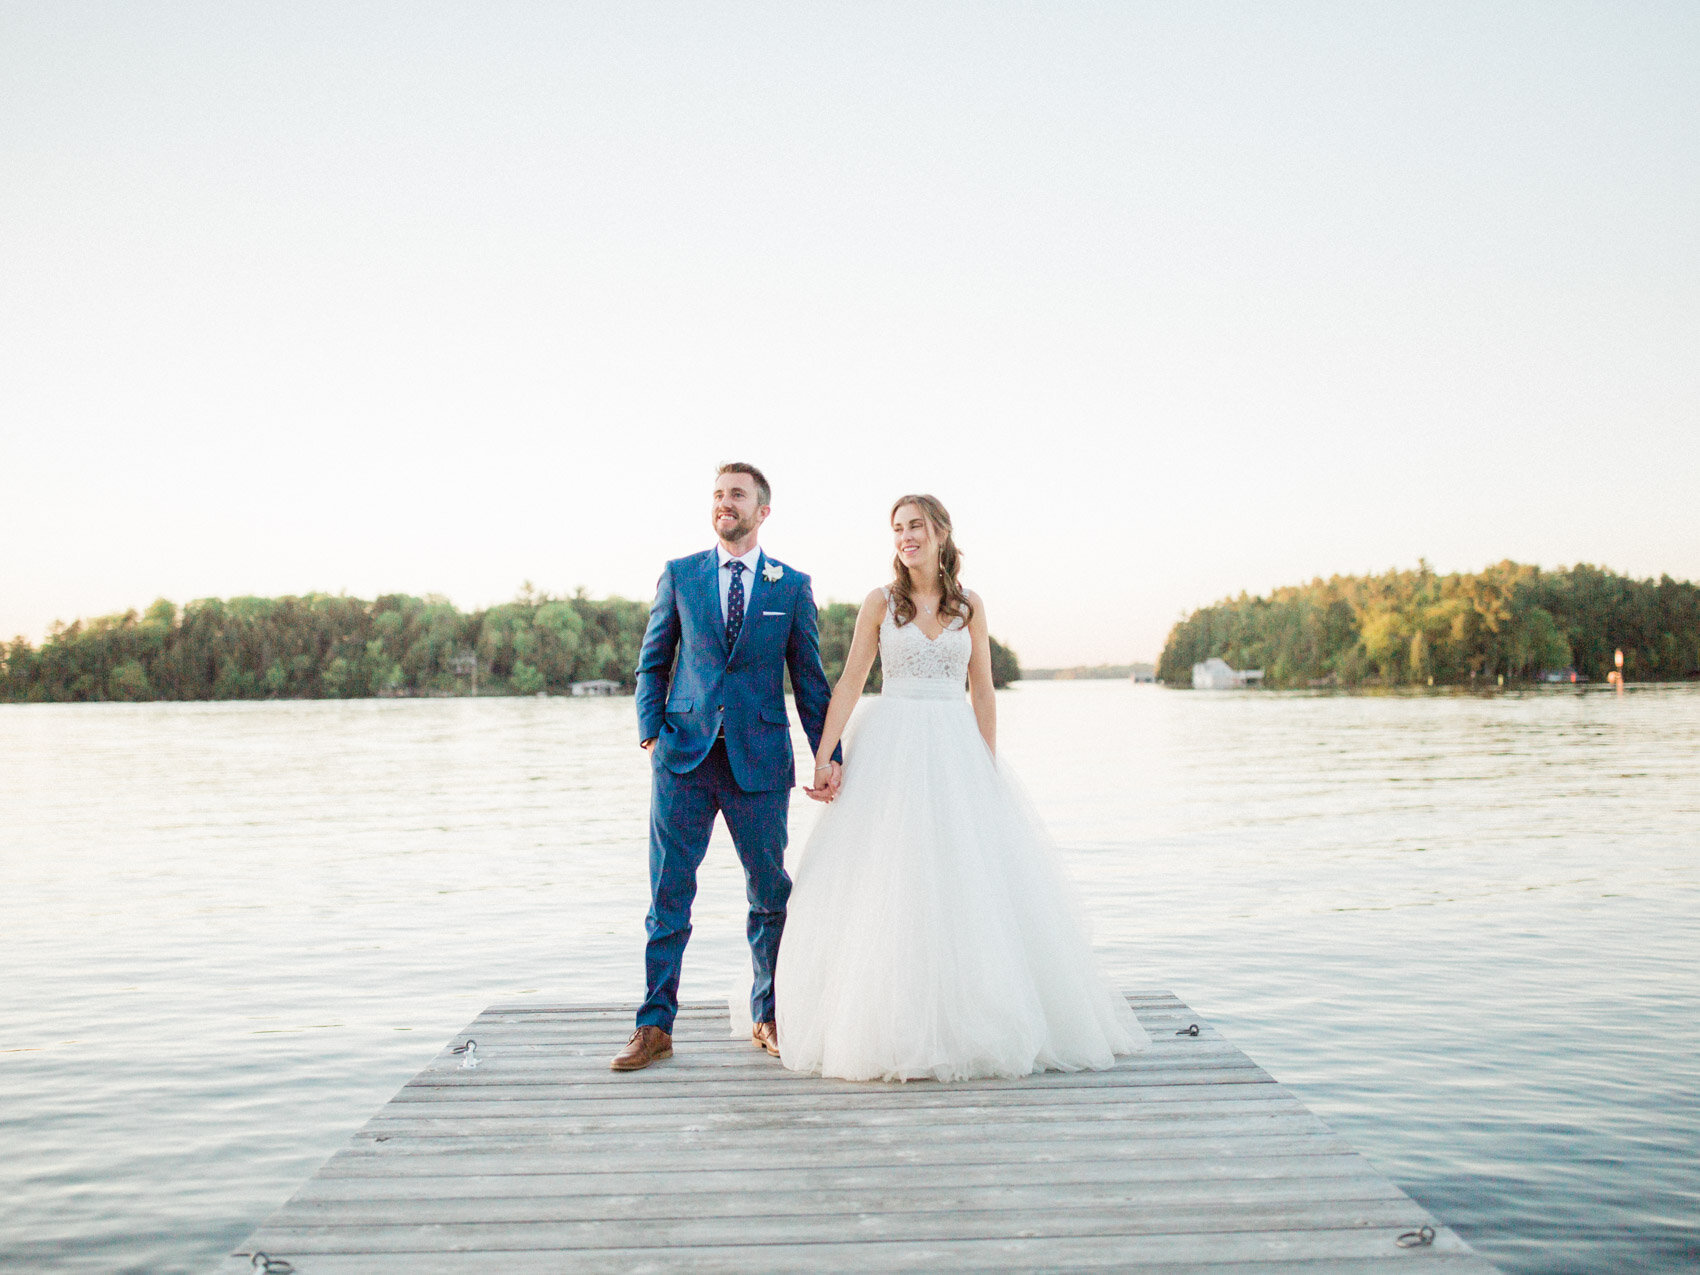 candid and natural wedding photograph in muskoka